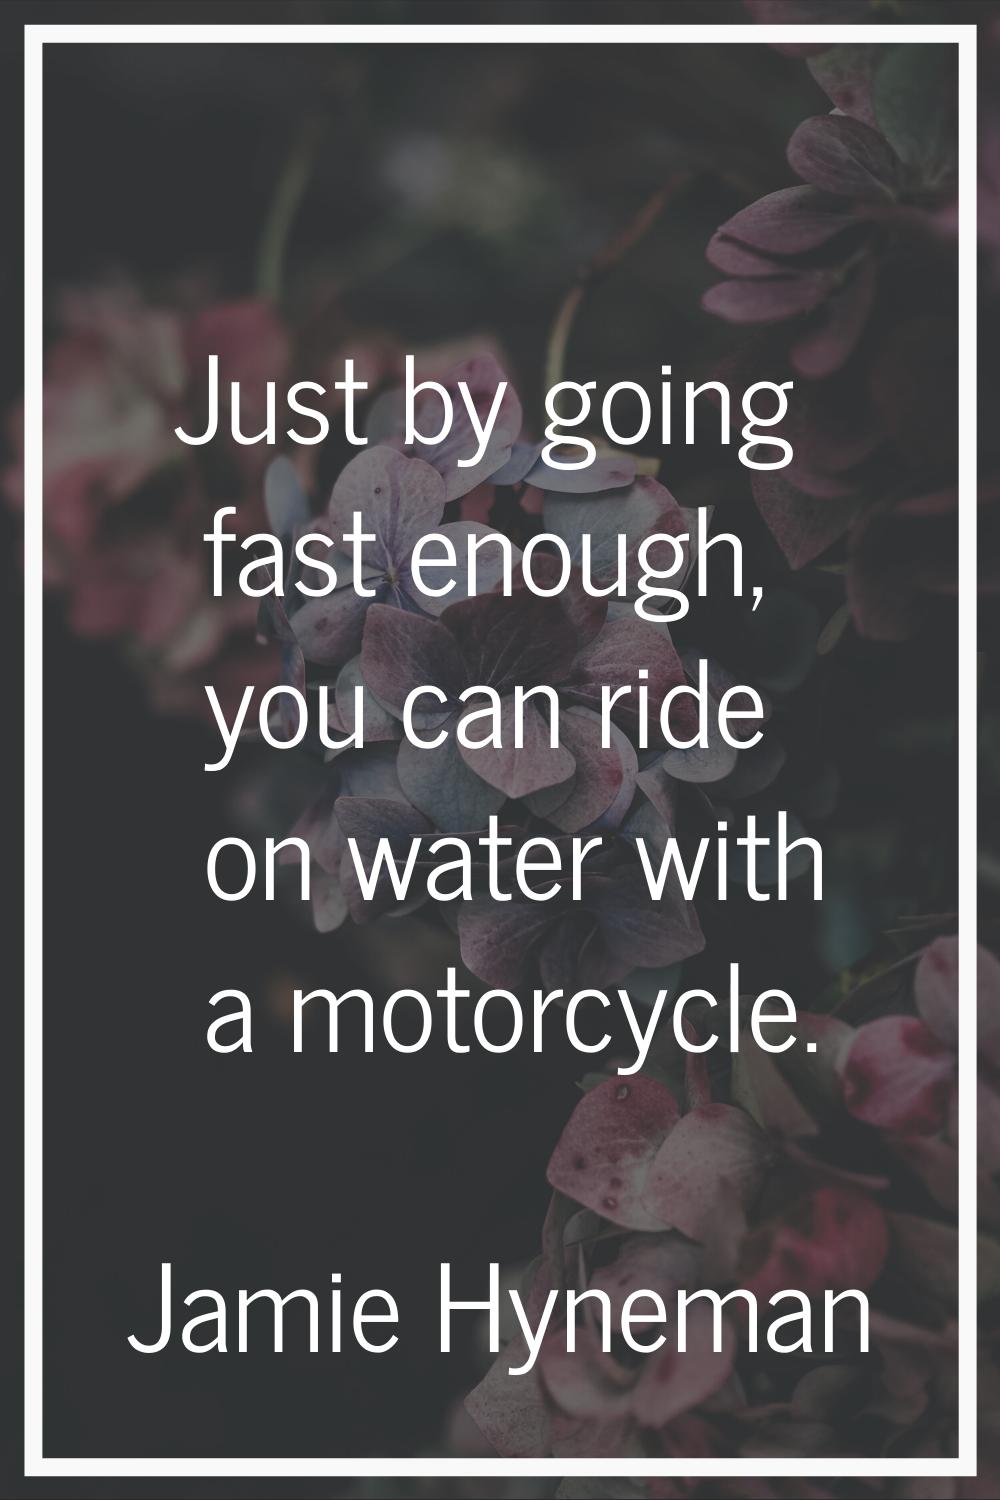 Just by going fast enough, you can ride on water with a motorcycle.